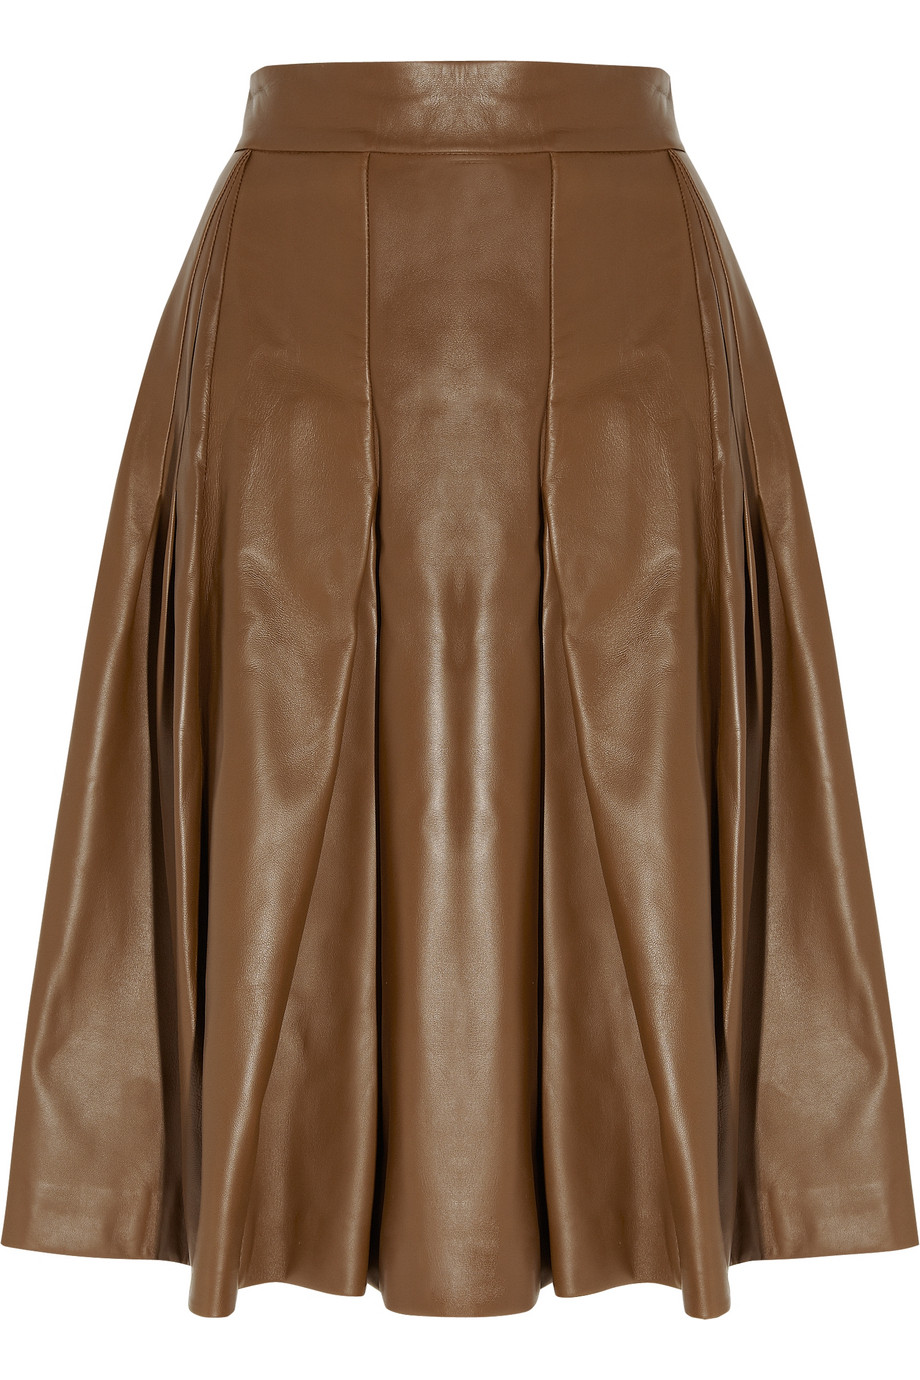 Saint laurent Leather A-line Skirt in Brown | Lyst